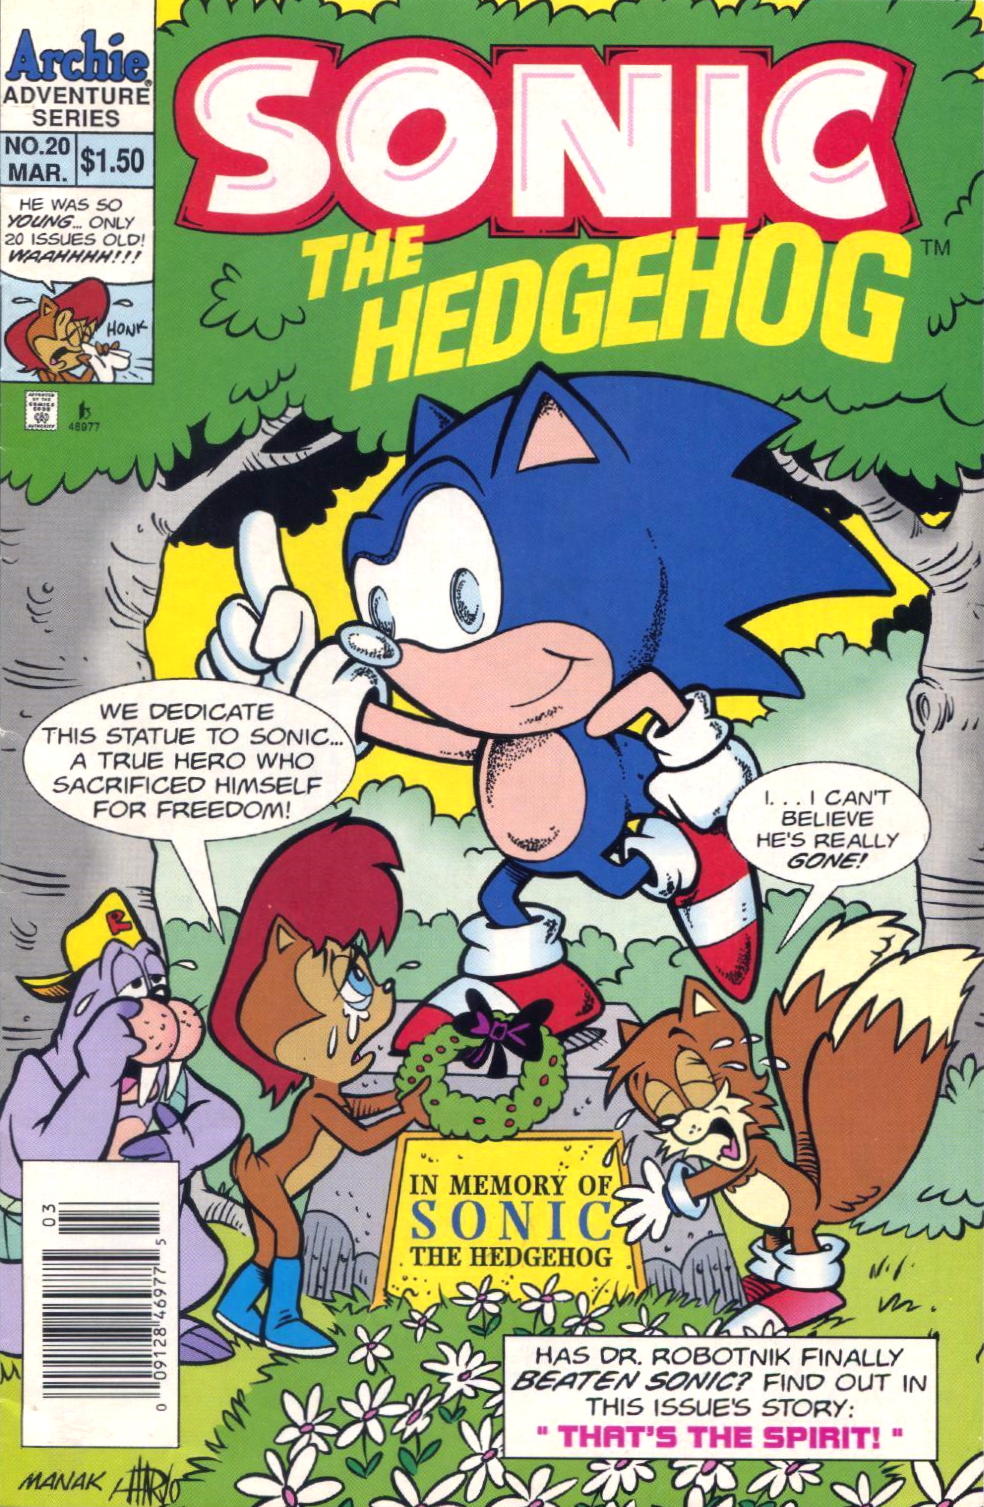 Archie Sonic the Hedgehog Issue 20 | Sonic News Network | FANDOM powered by Wikia1496 x 2192